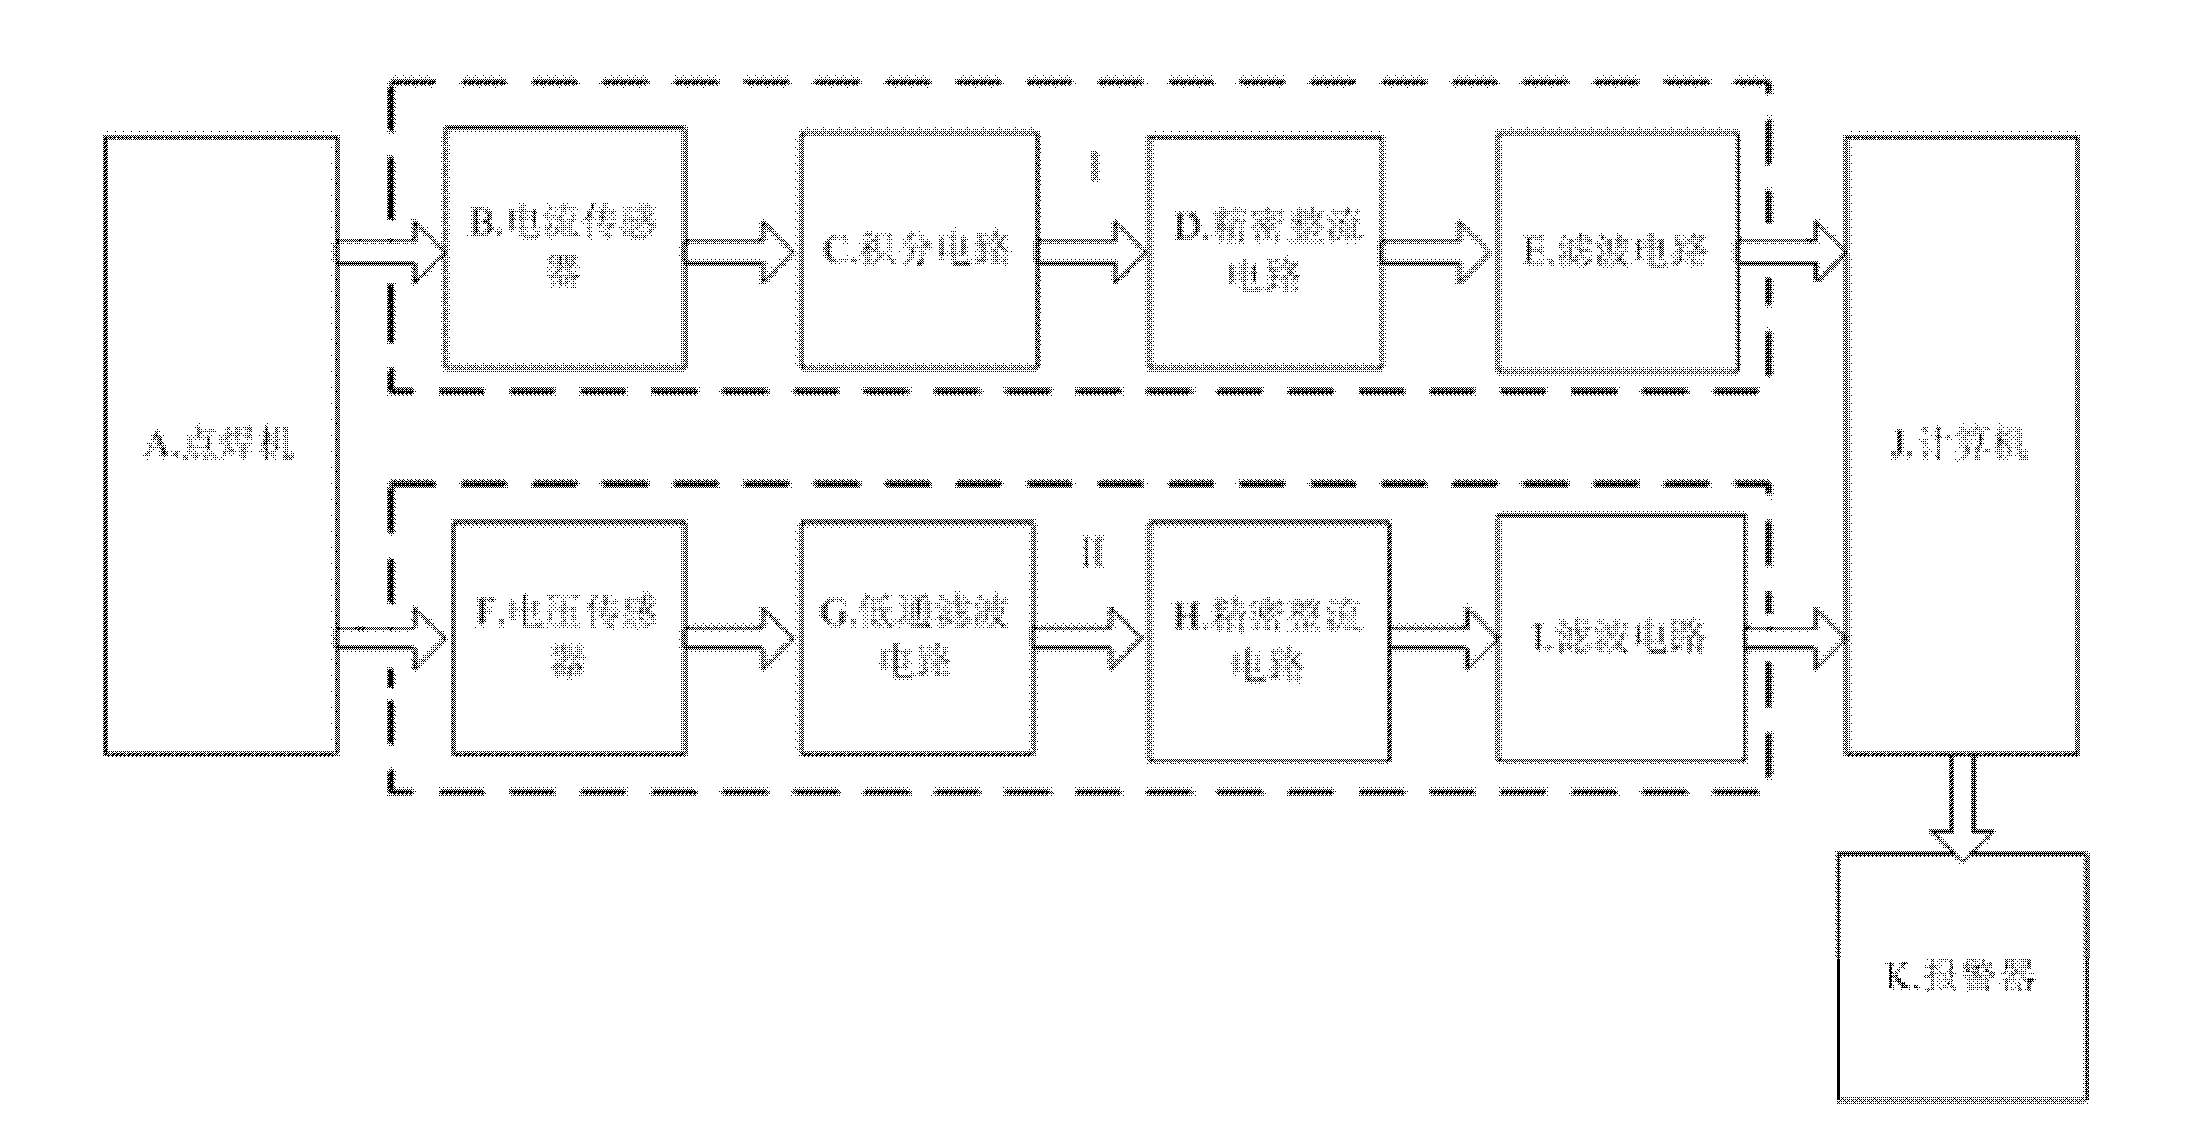 Suspension-type resistance spot welder connection cable real-time on-line monitoring method and device